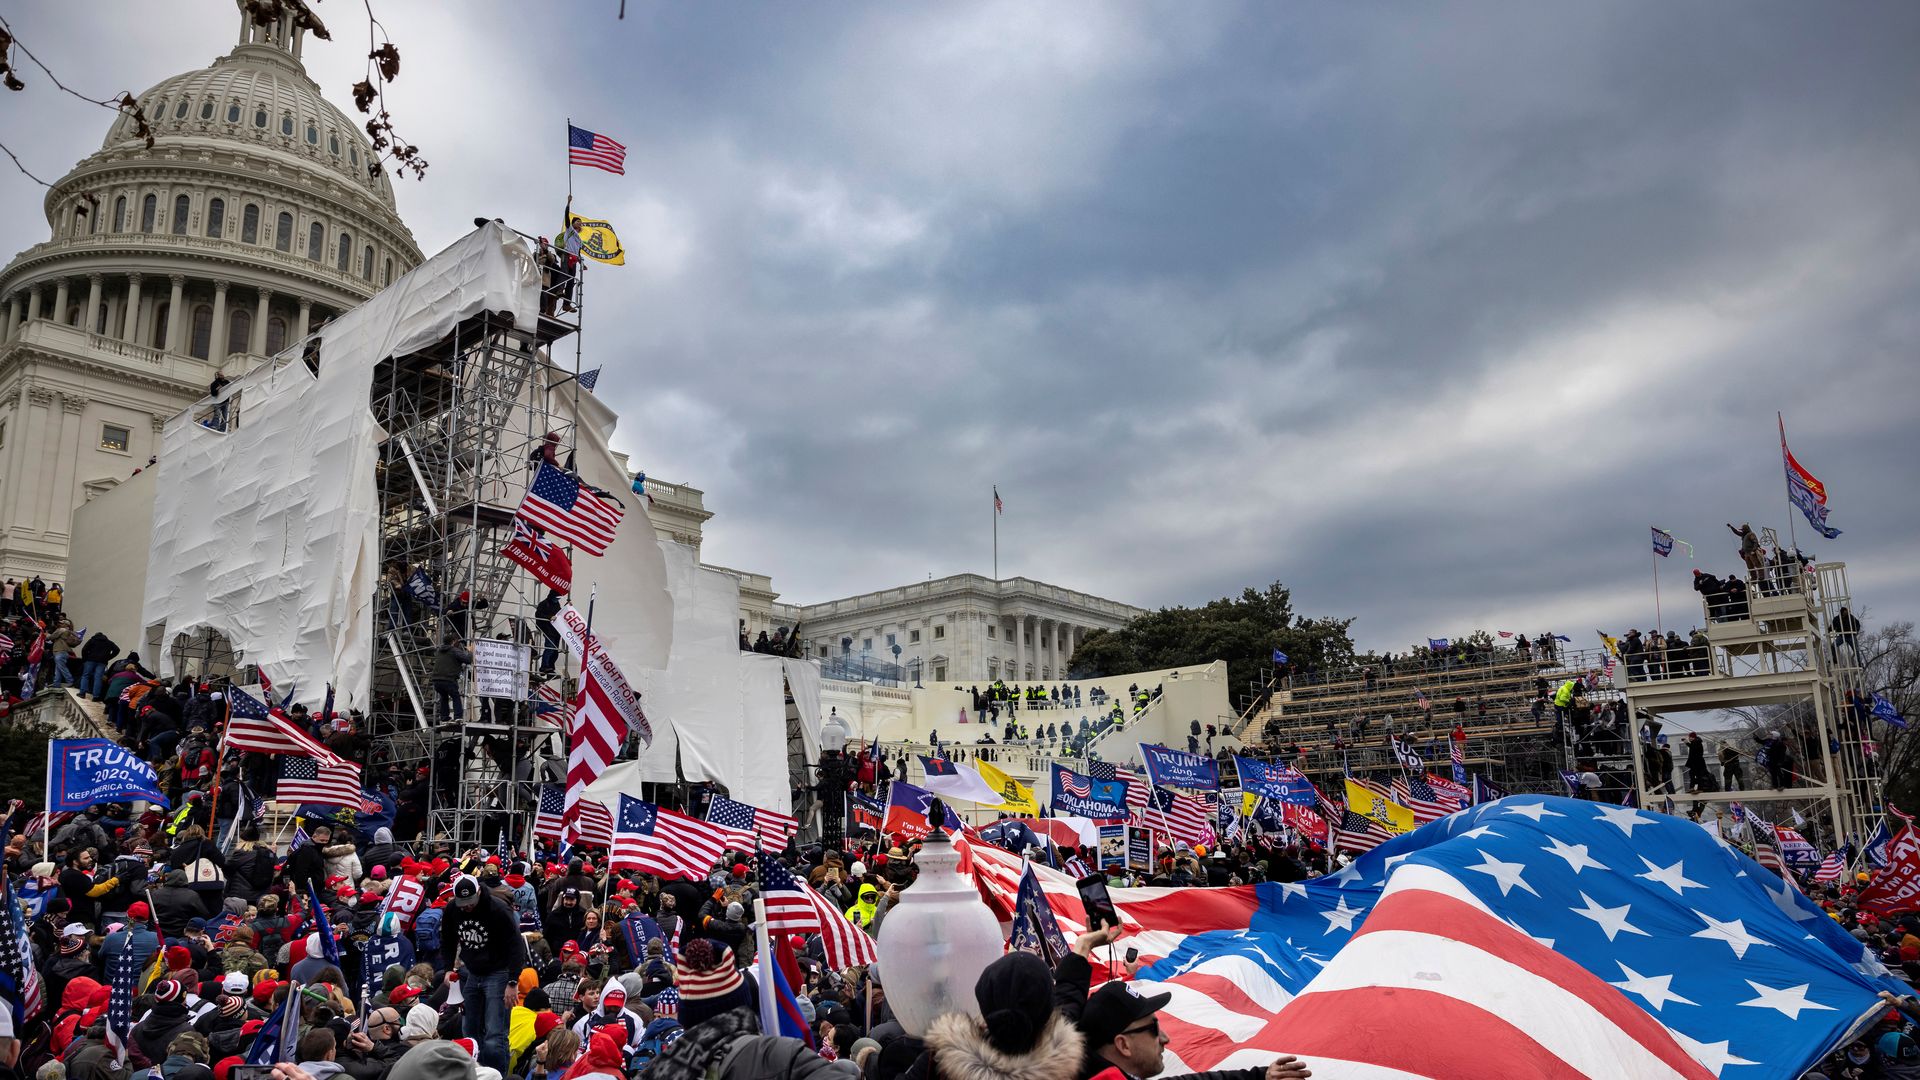 Photo of the Jan. 6 Capitol insurrection. Rioters are outside the Capitol with American flags.